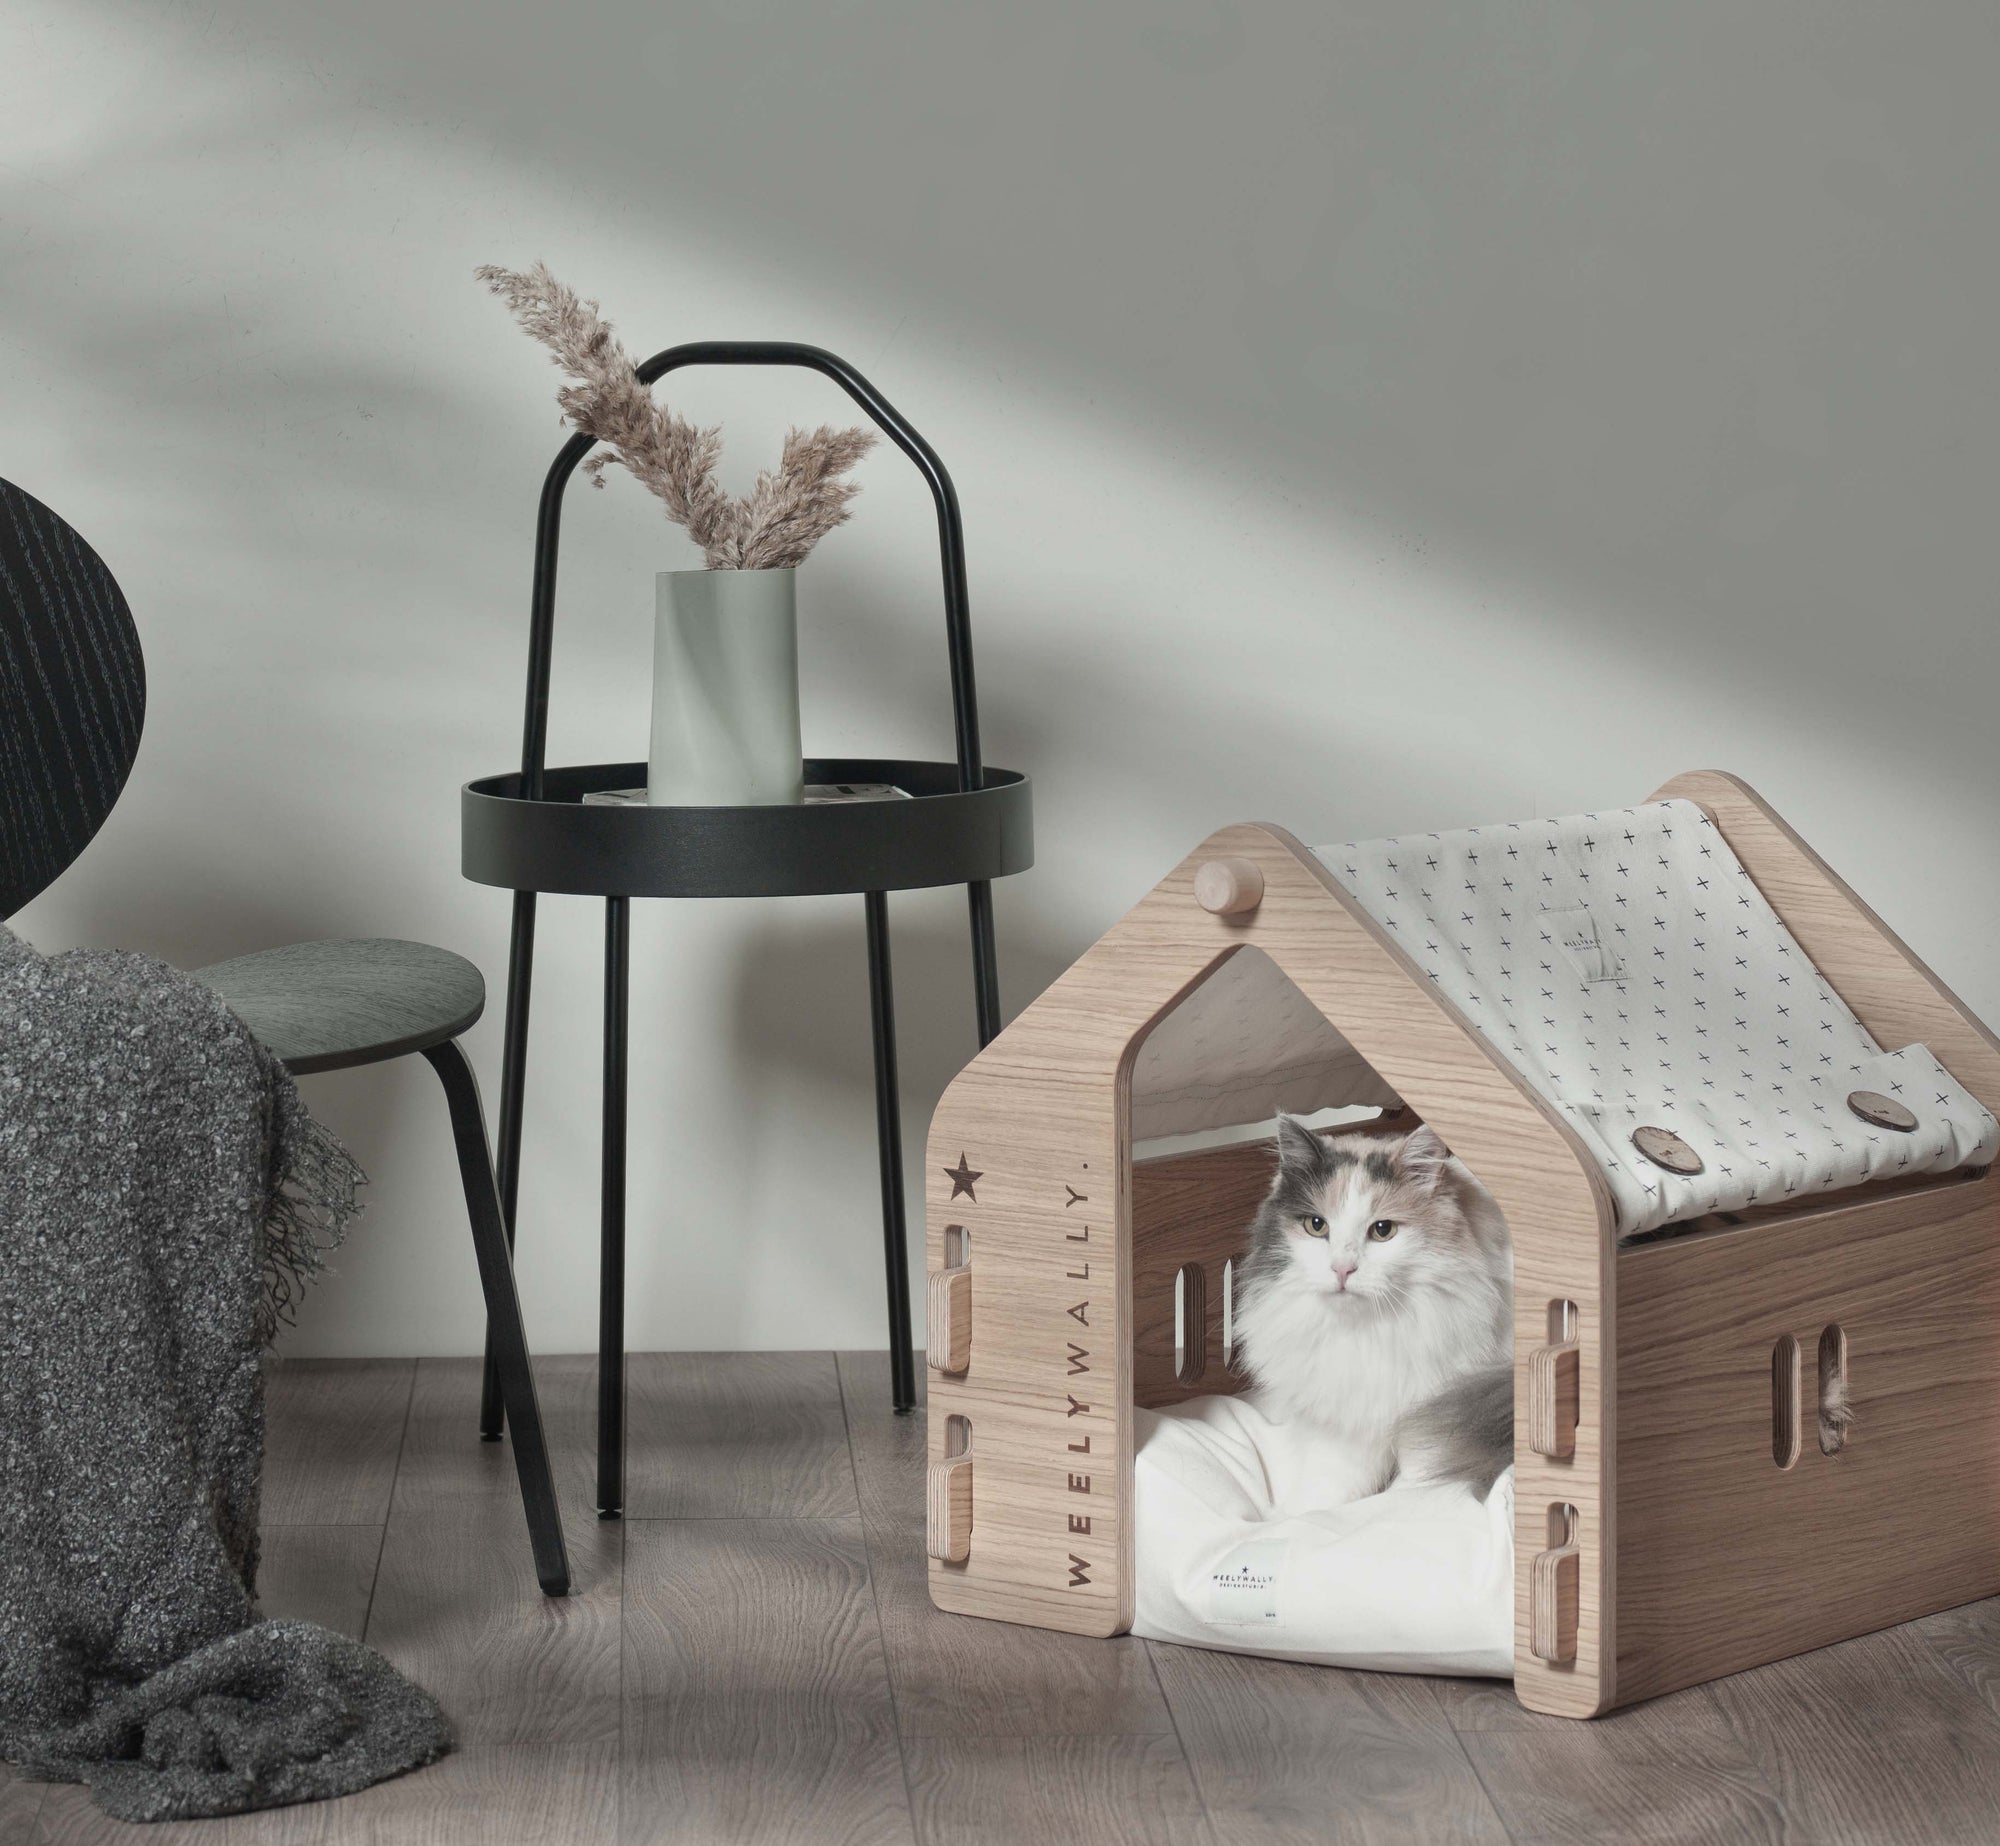 Indoor Dog or Cat house bed - a little piece of paradise in your home!